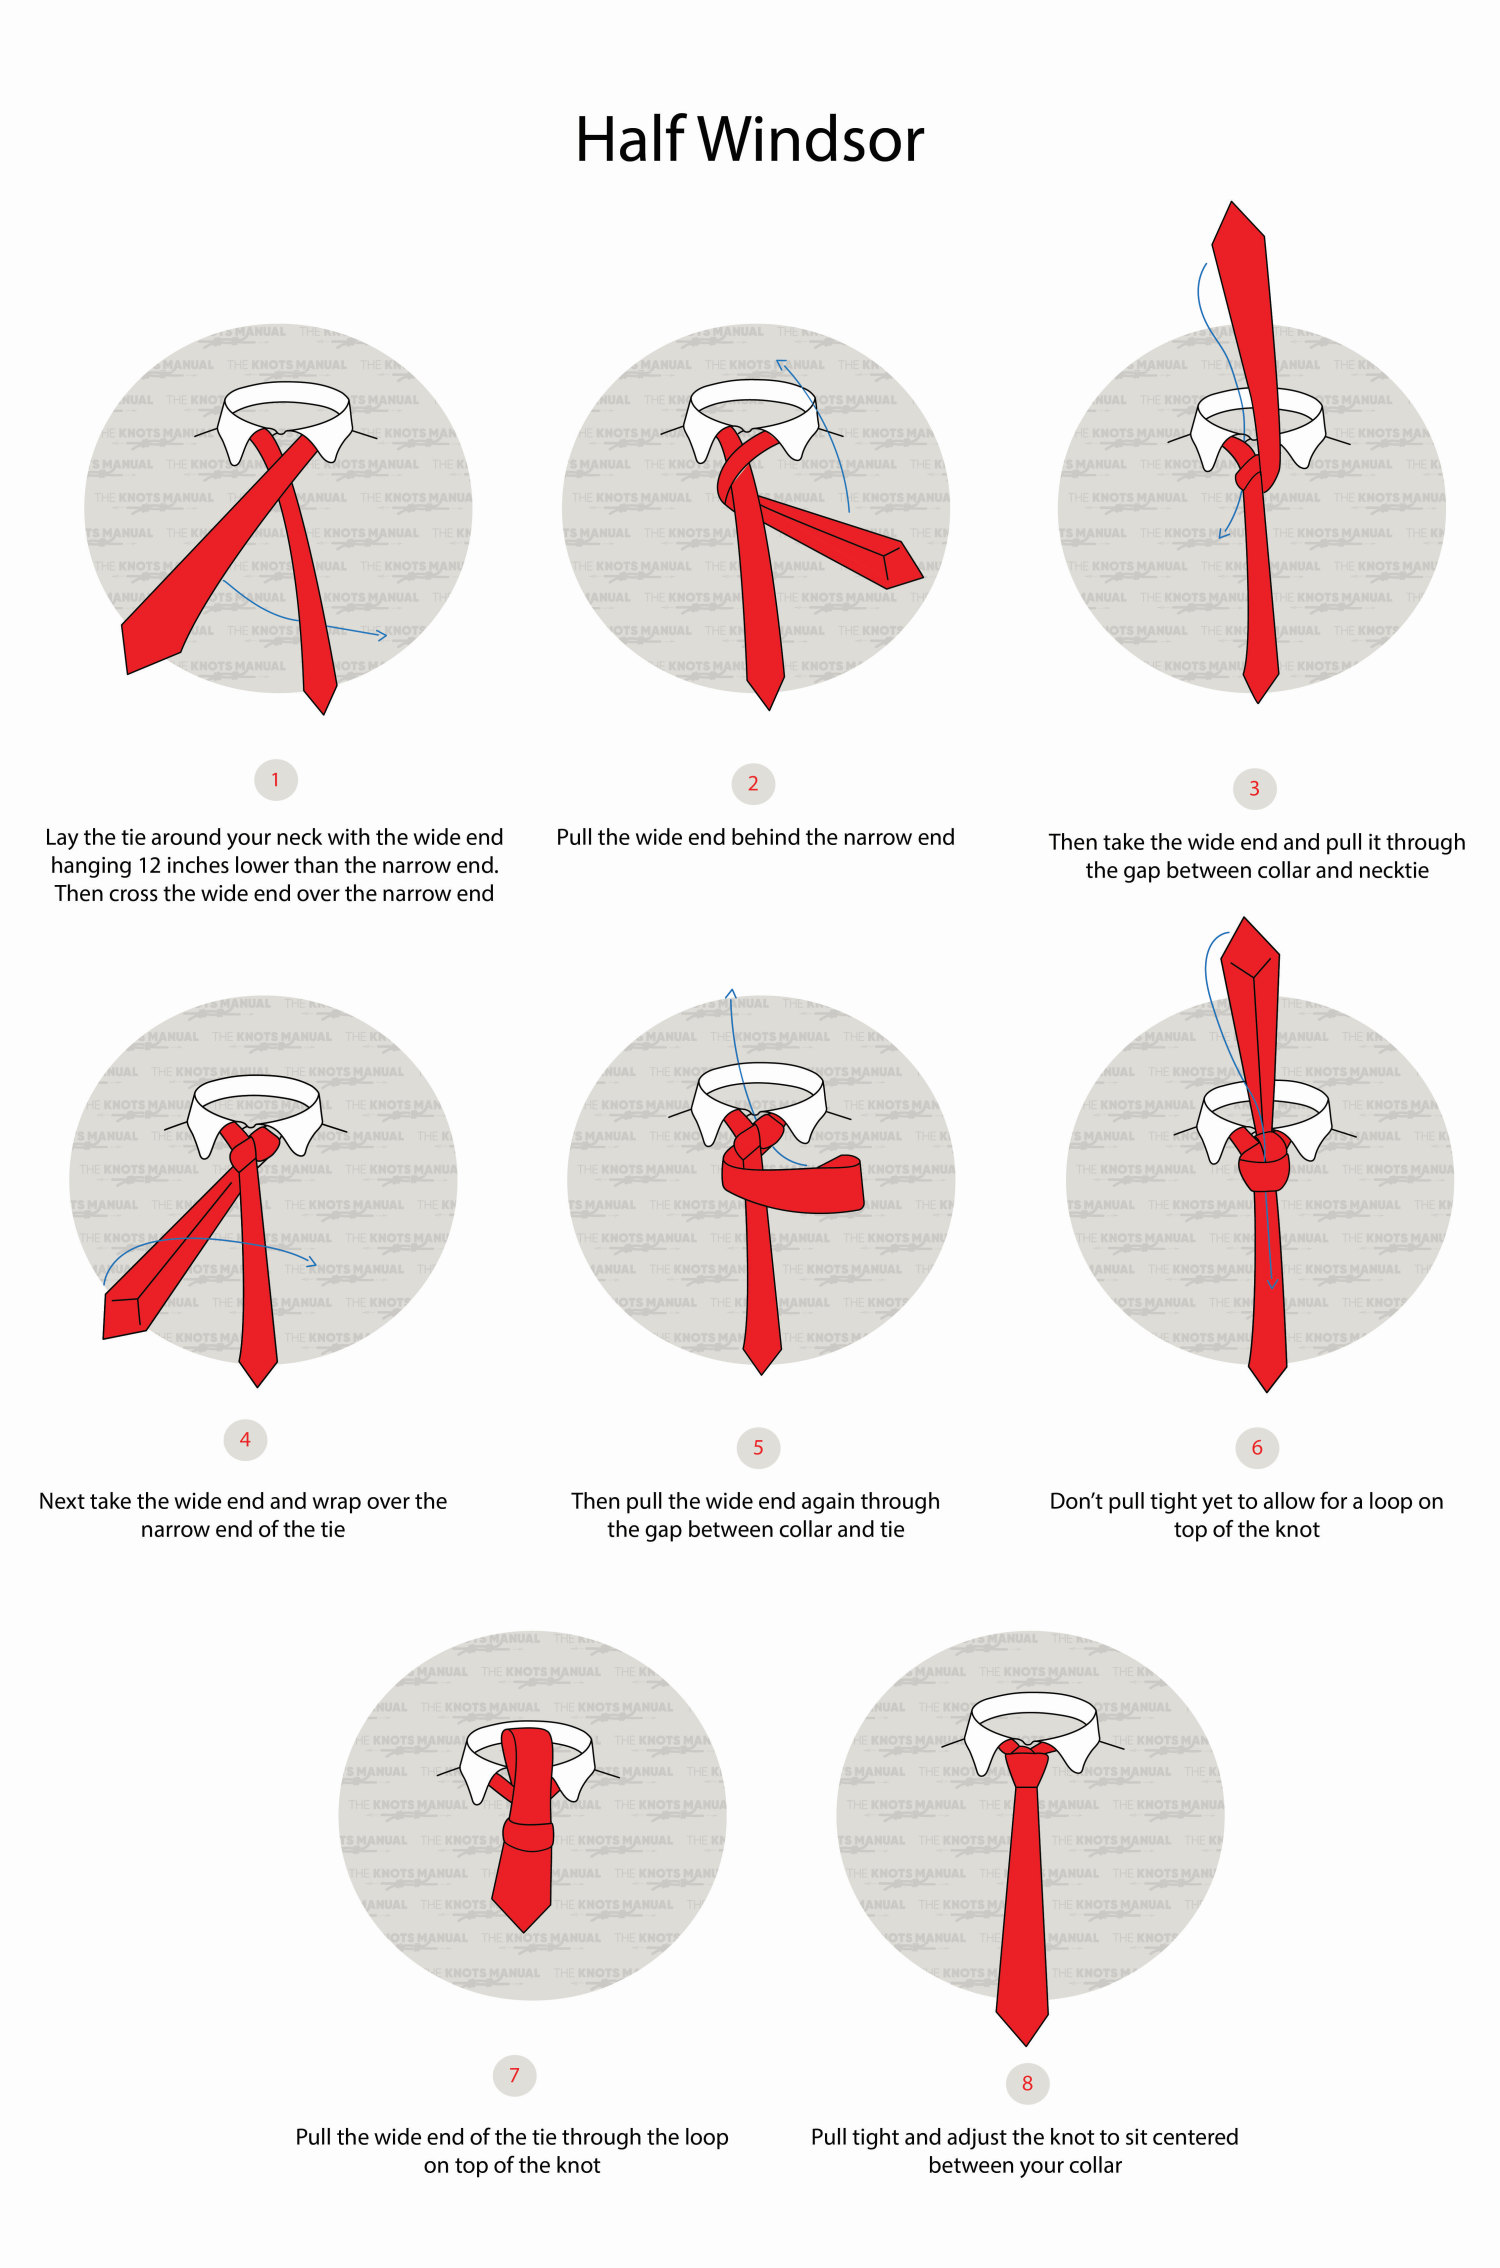 How To Tie A Half Windsor Knot Step by Step